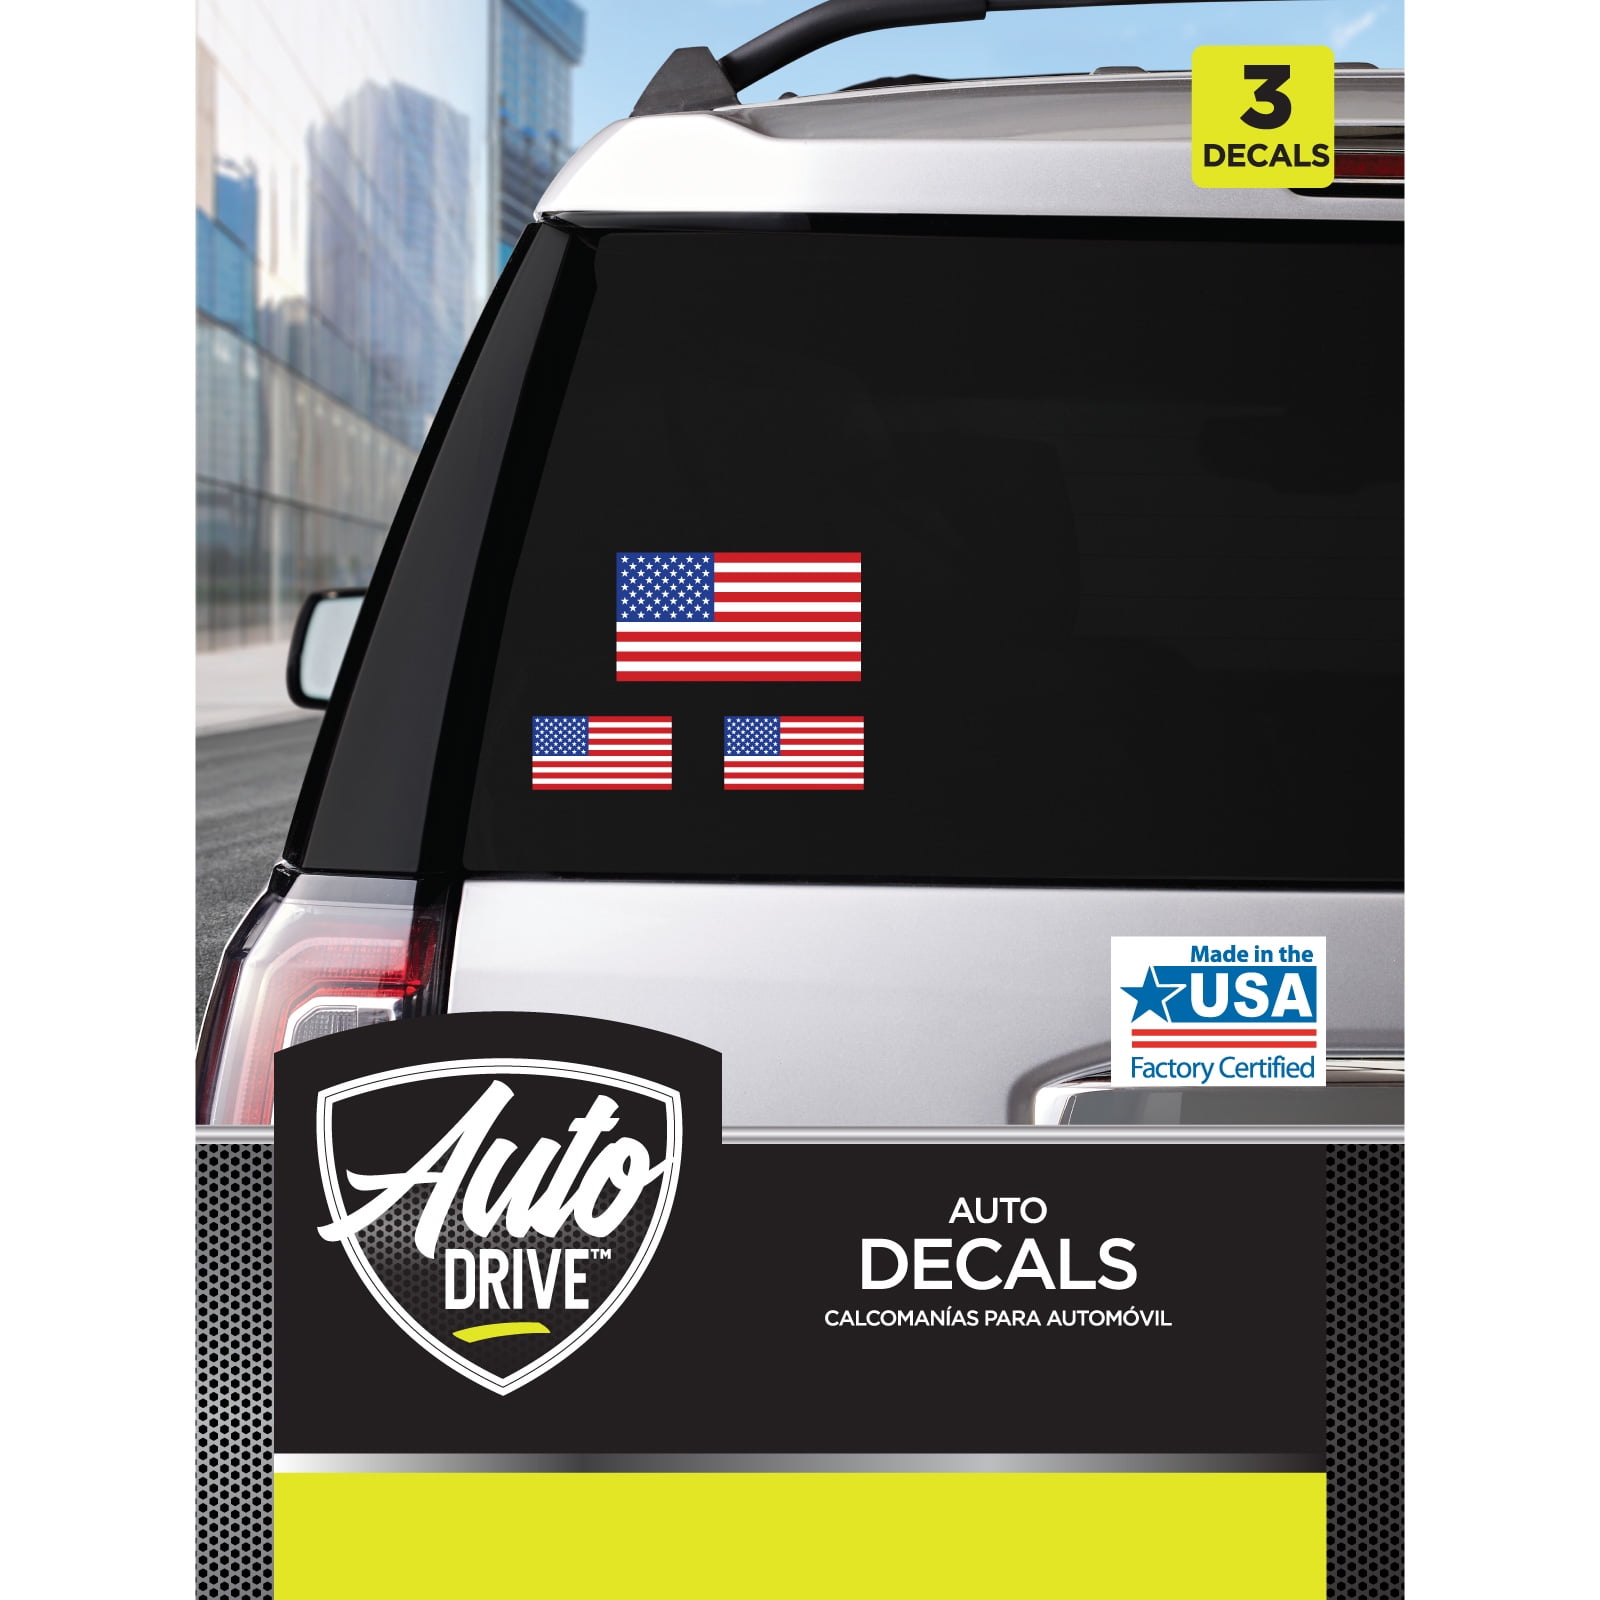 Single Sided Design Suction Cup Included Affix to any Window or Smooth Surface Dad's Taxi Car Vehicle Window Sign Sticker